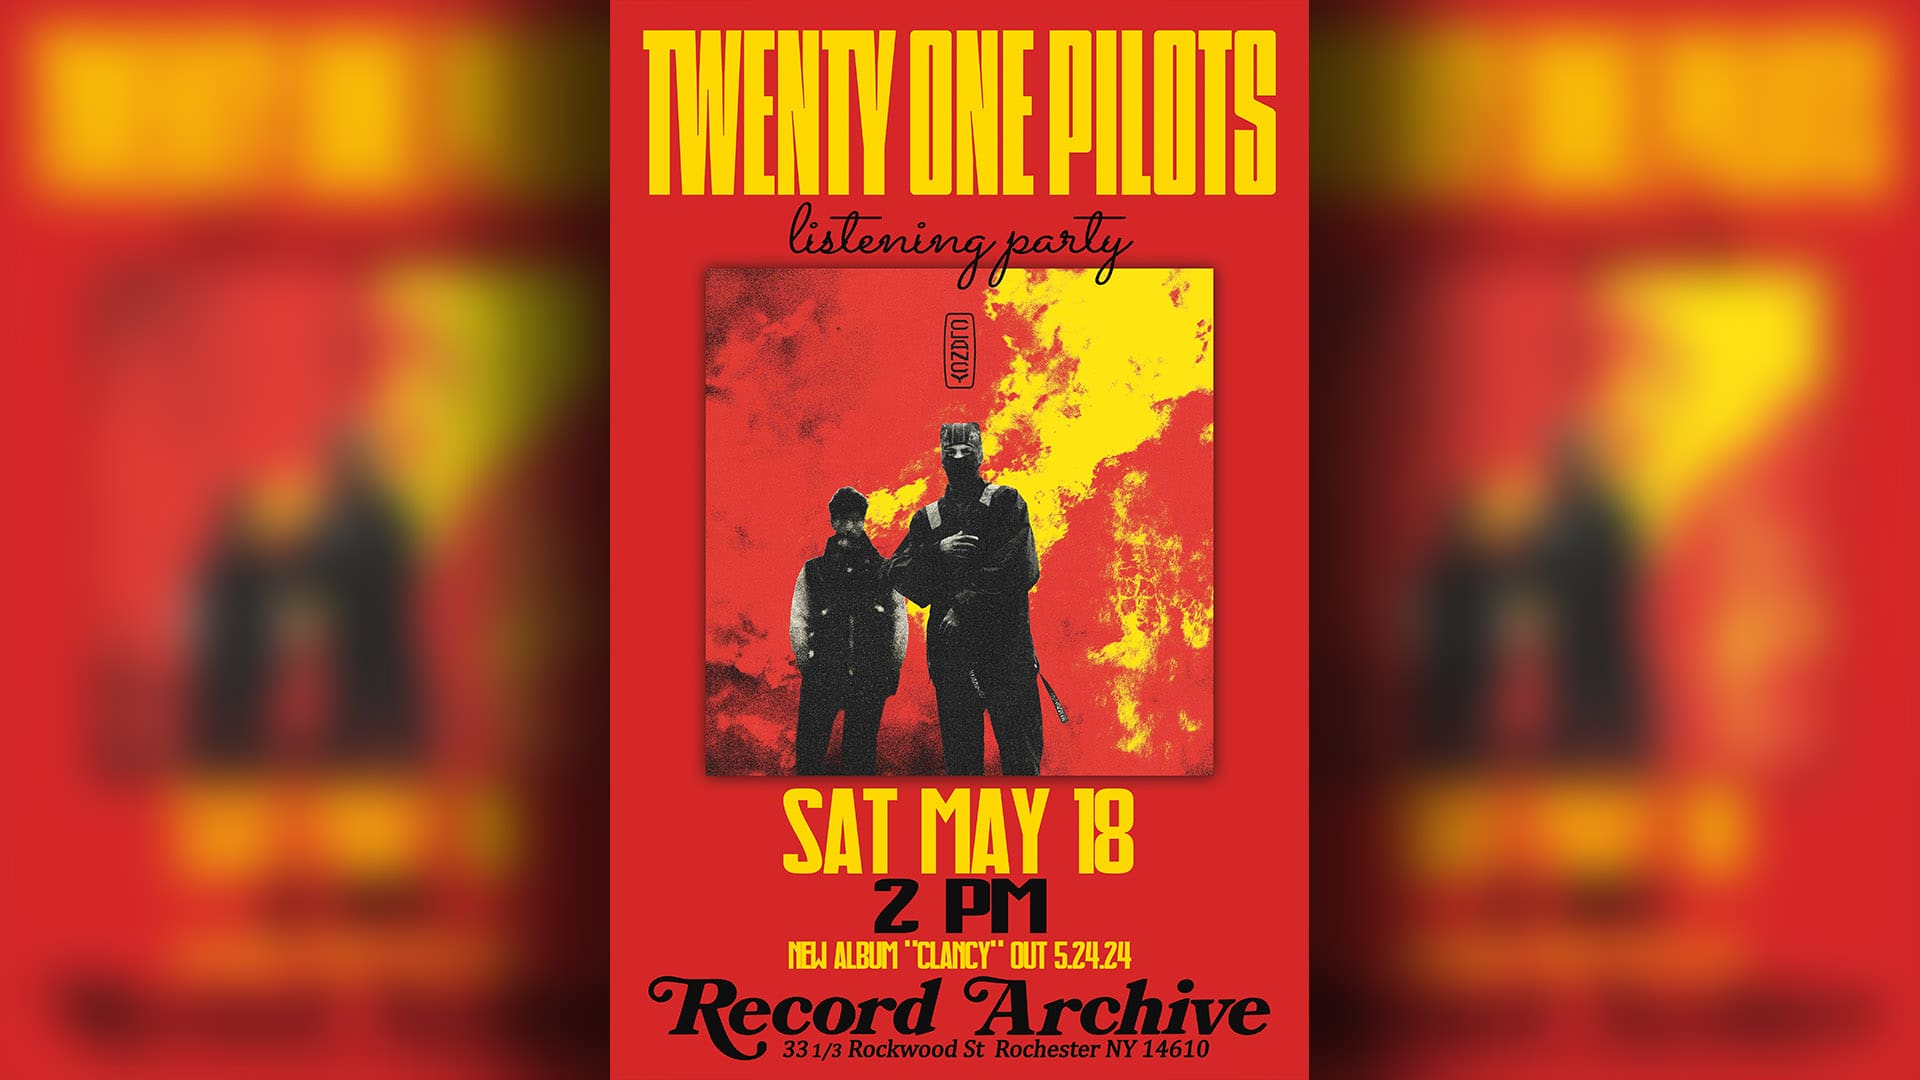 Twenty One Pilots listening party SAT MAY 18 2pm New Album "Clancy" Out 5.24.24 Record Archive 33 1/3 Rockwood St 14610